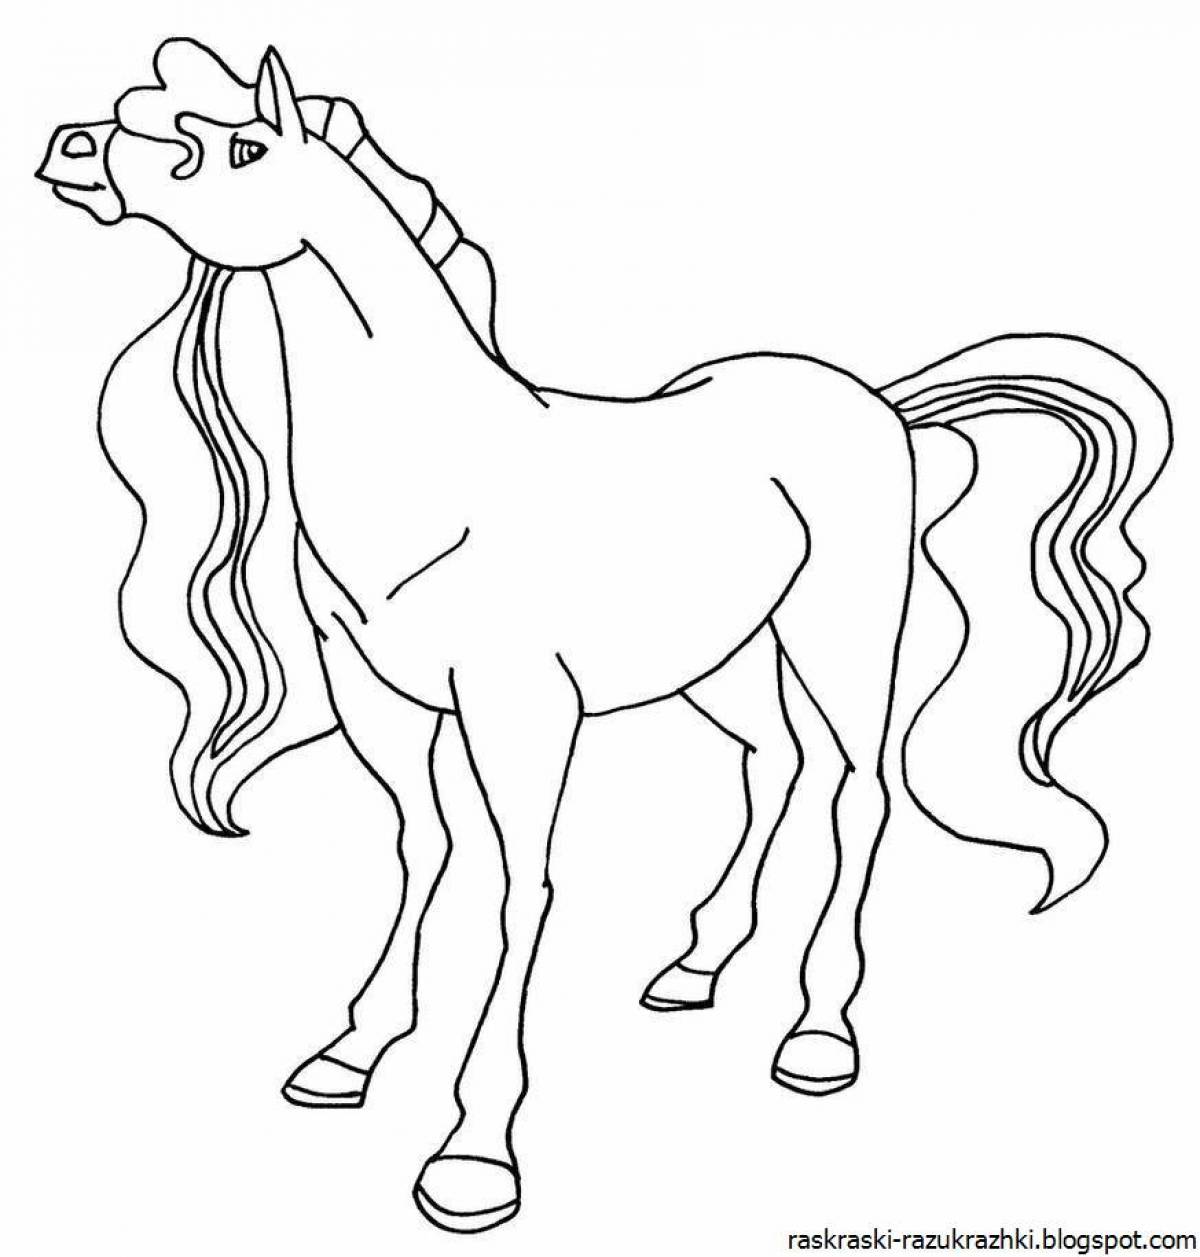 Amazing horse coloring book